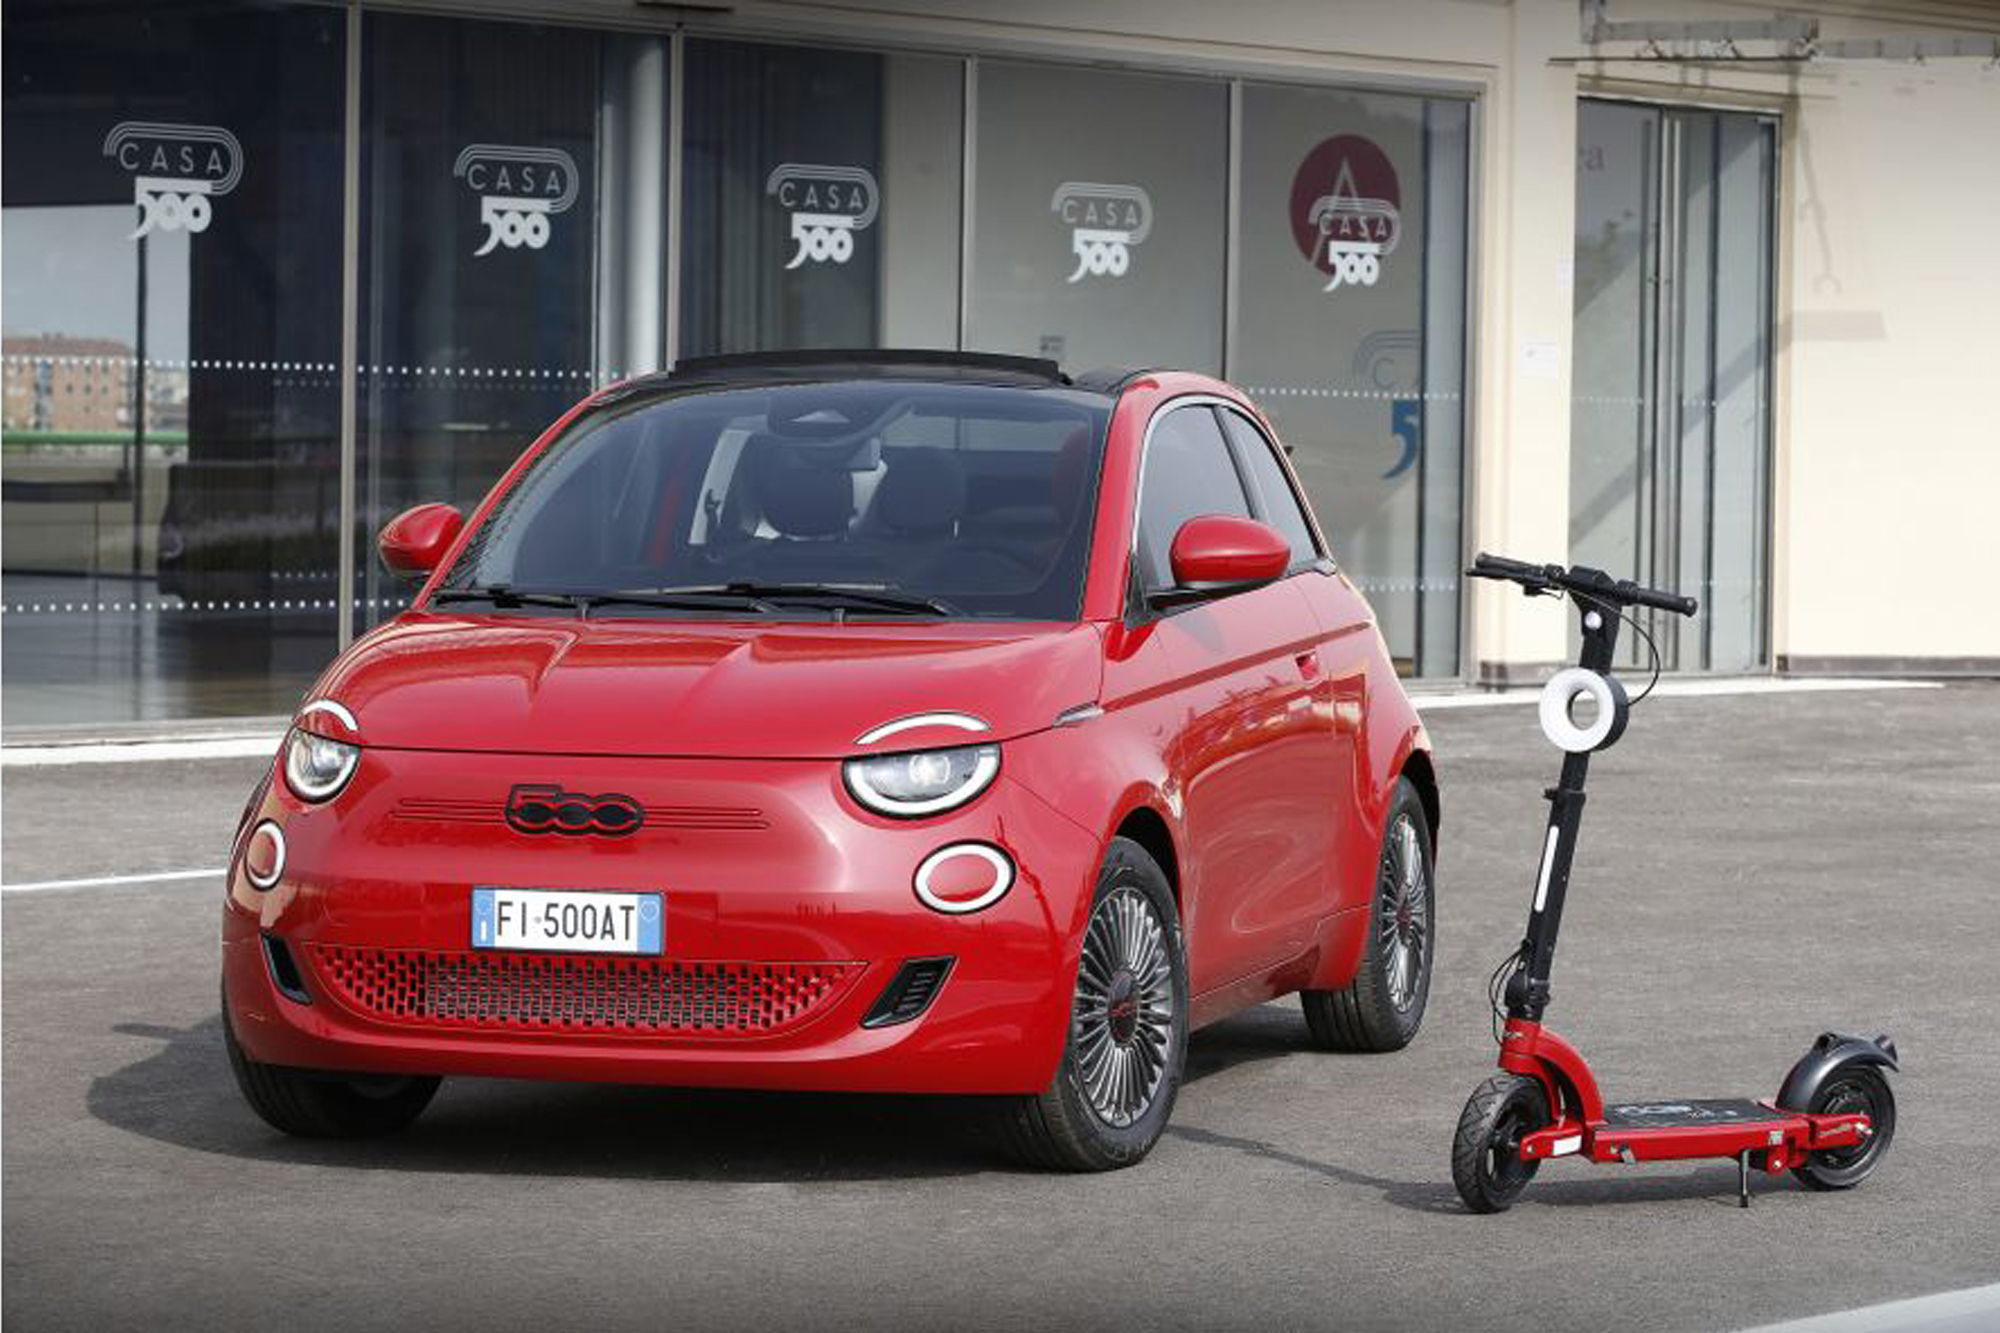 H FIAT συνεργάζεται με την RED